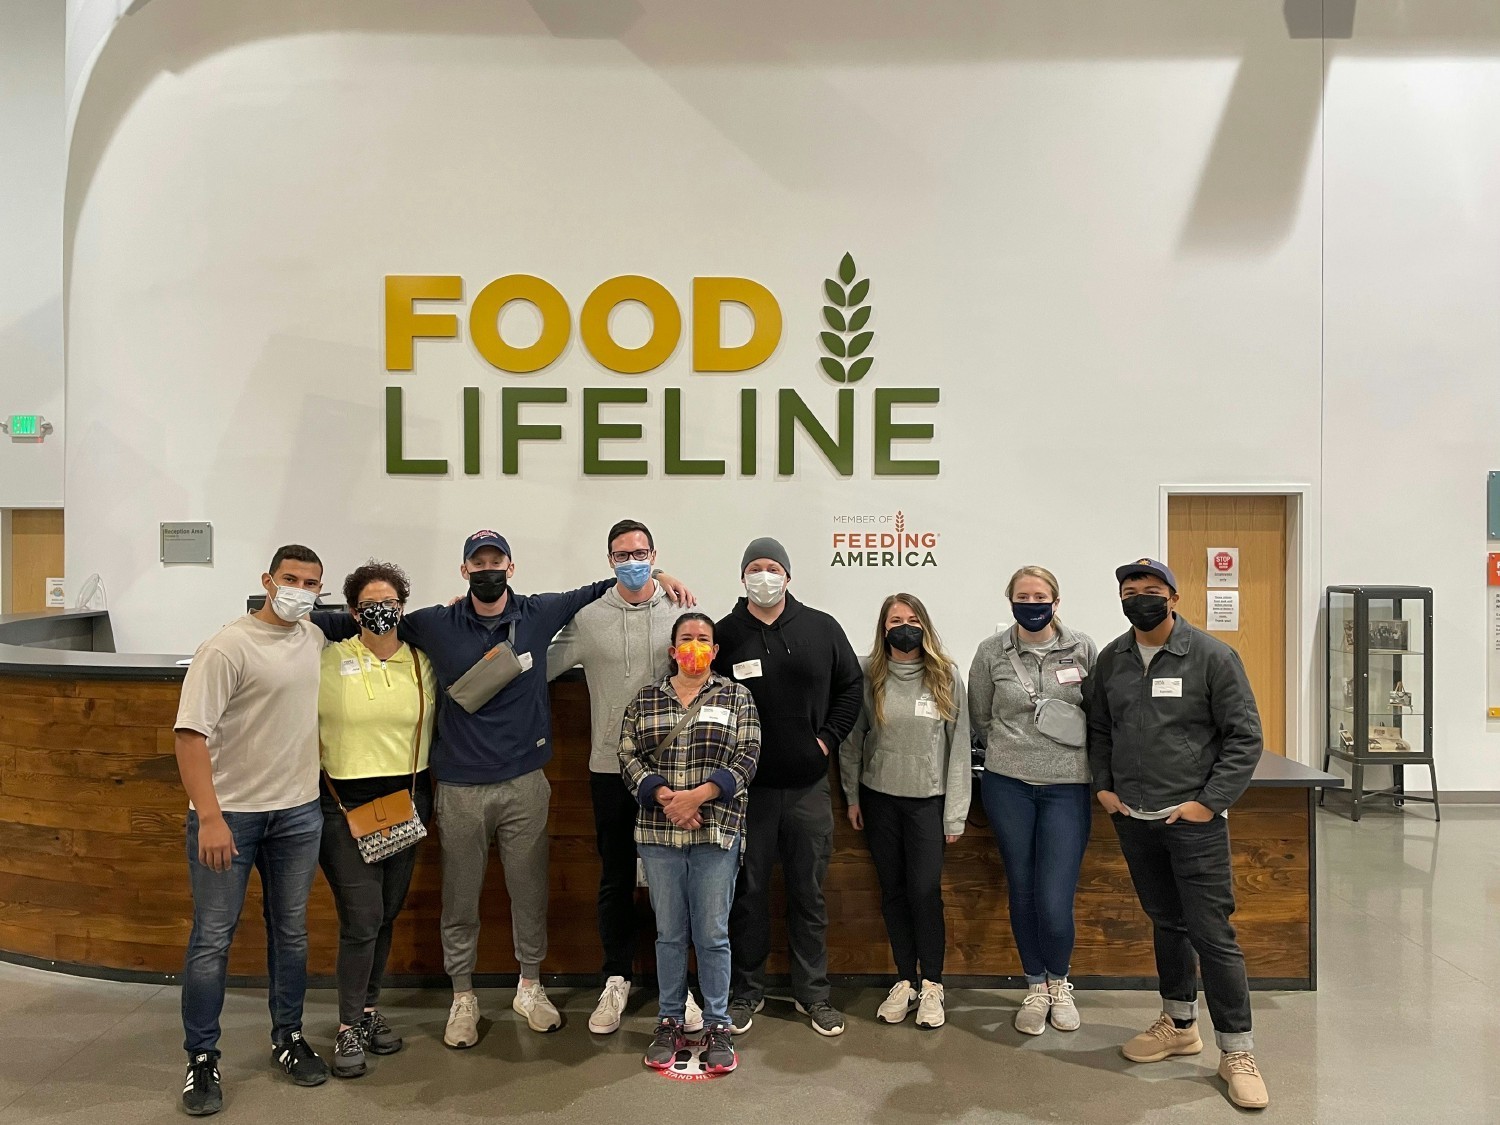 Some of our team volunteering at Food Lifeline, helping sort and package food donations for our community.